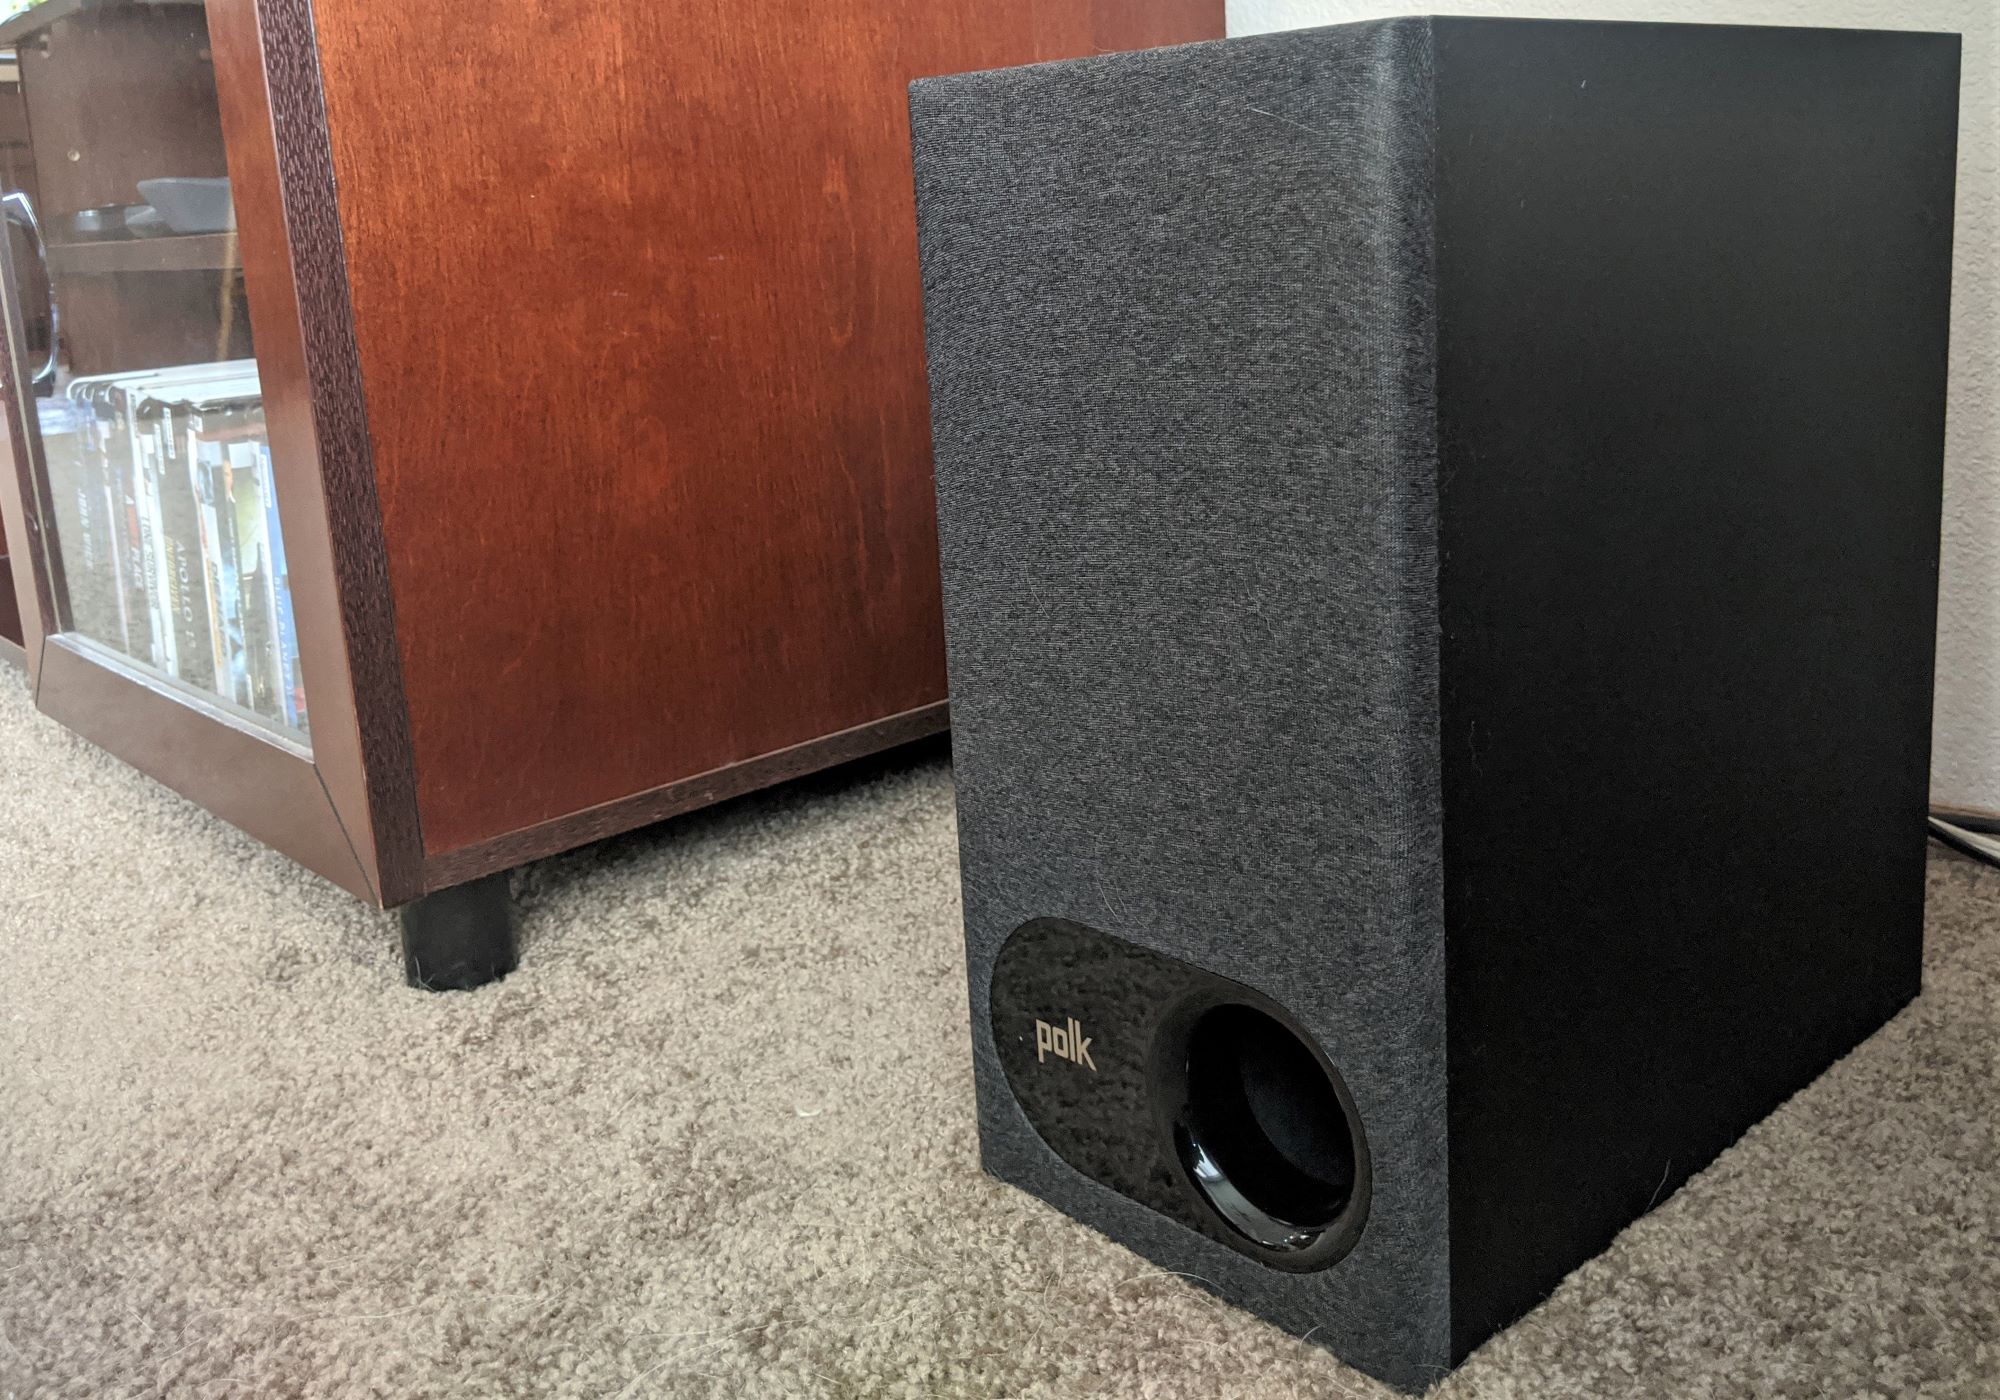 Polk Audio Signa S3 Review: Quality Bar, Steep Competition